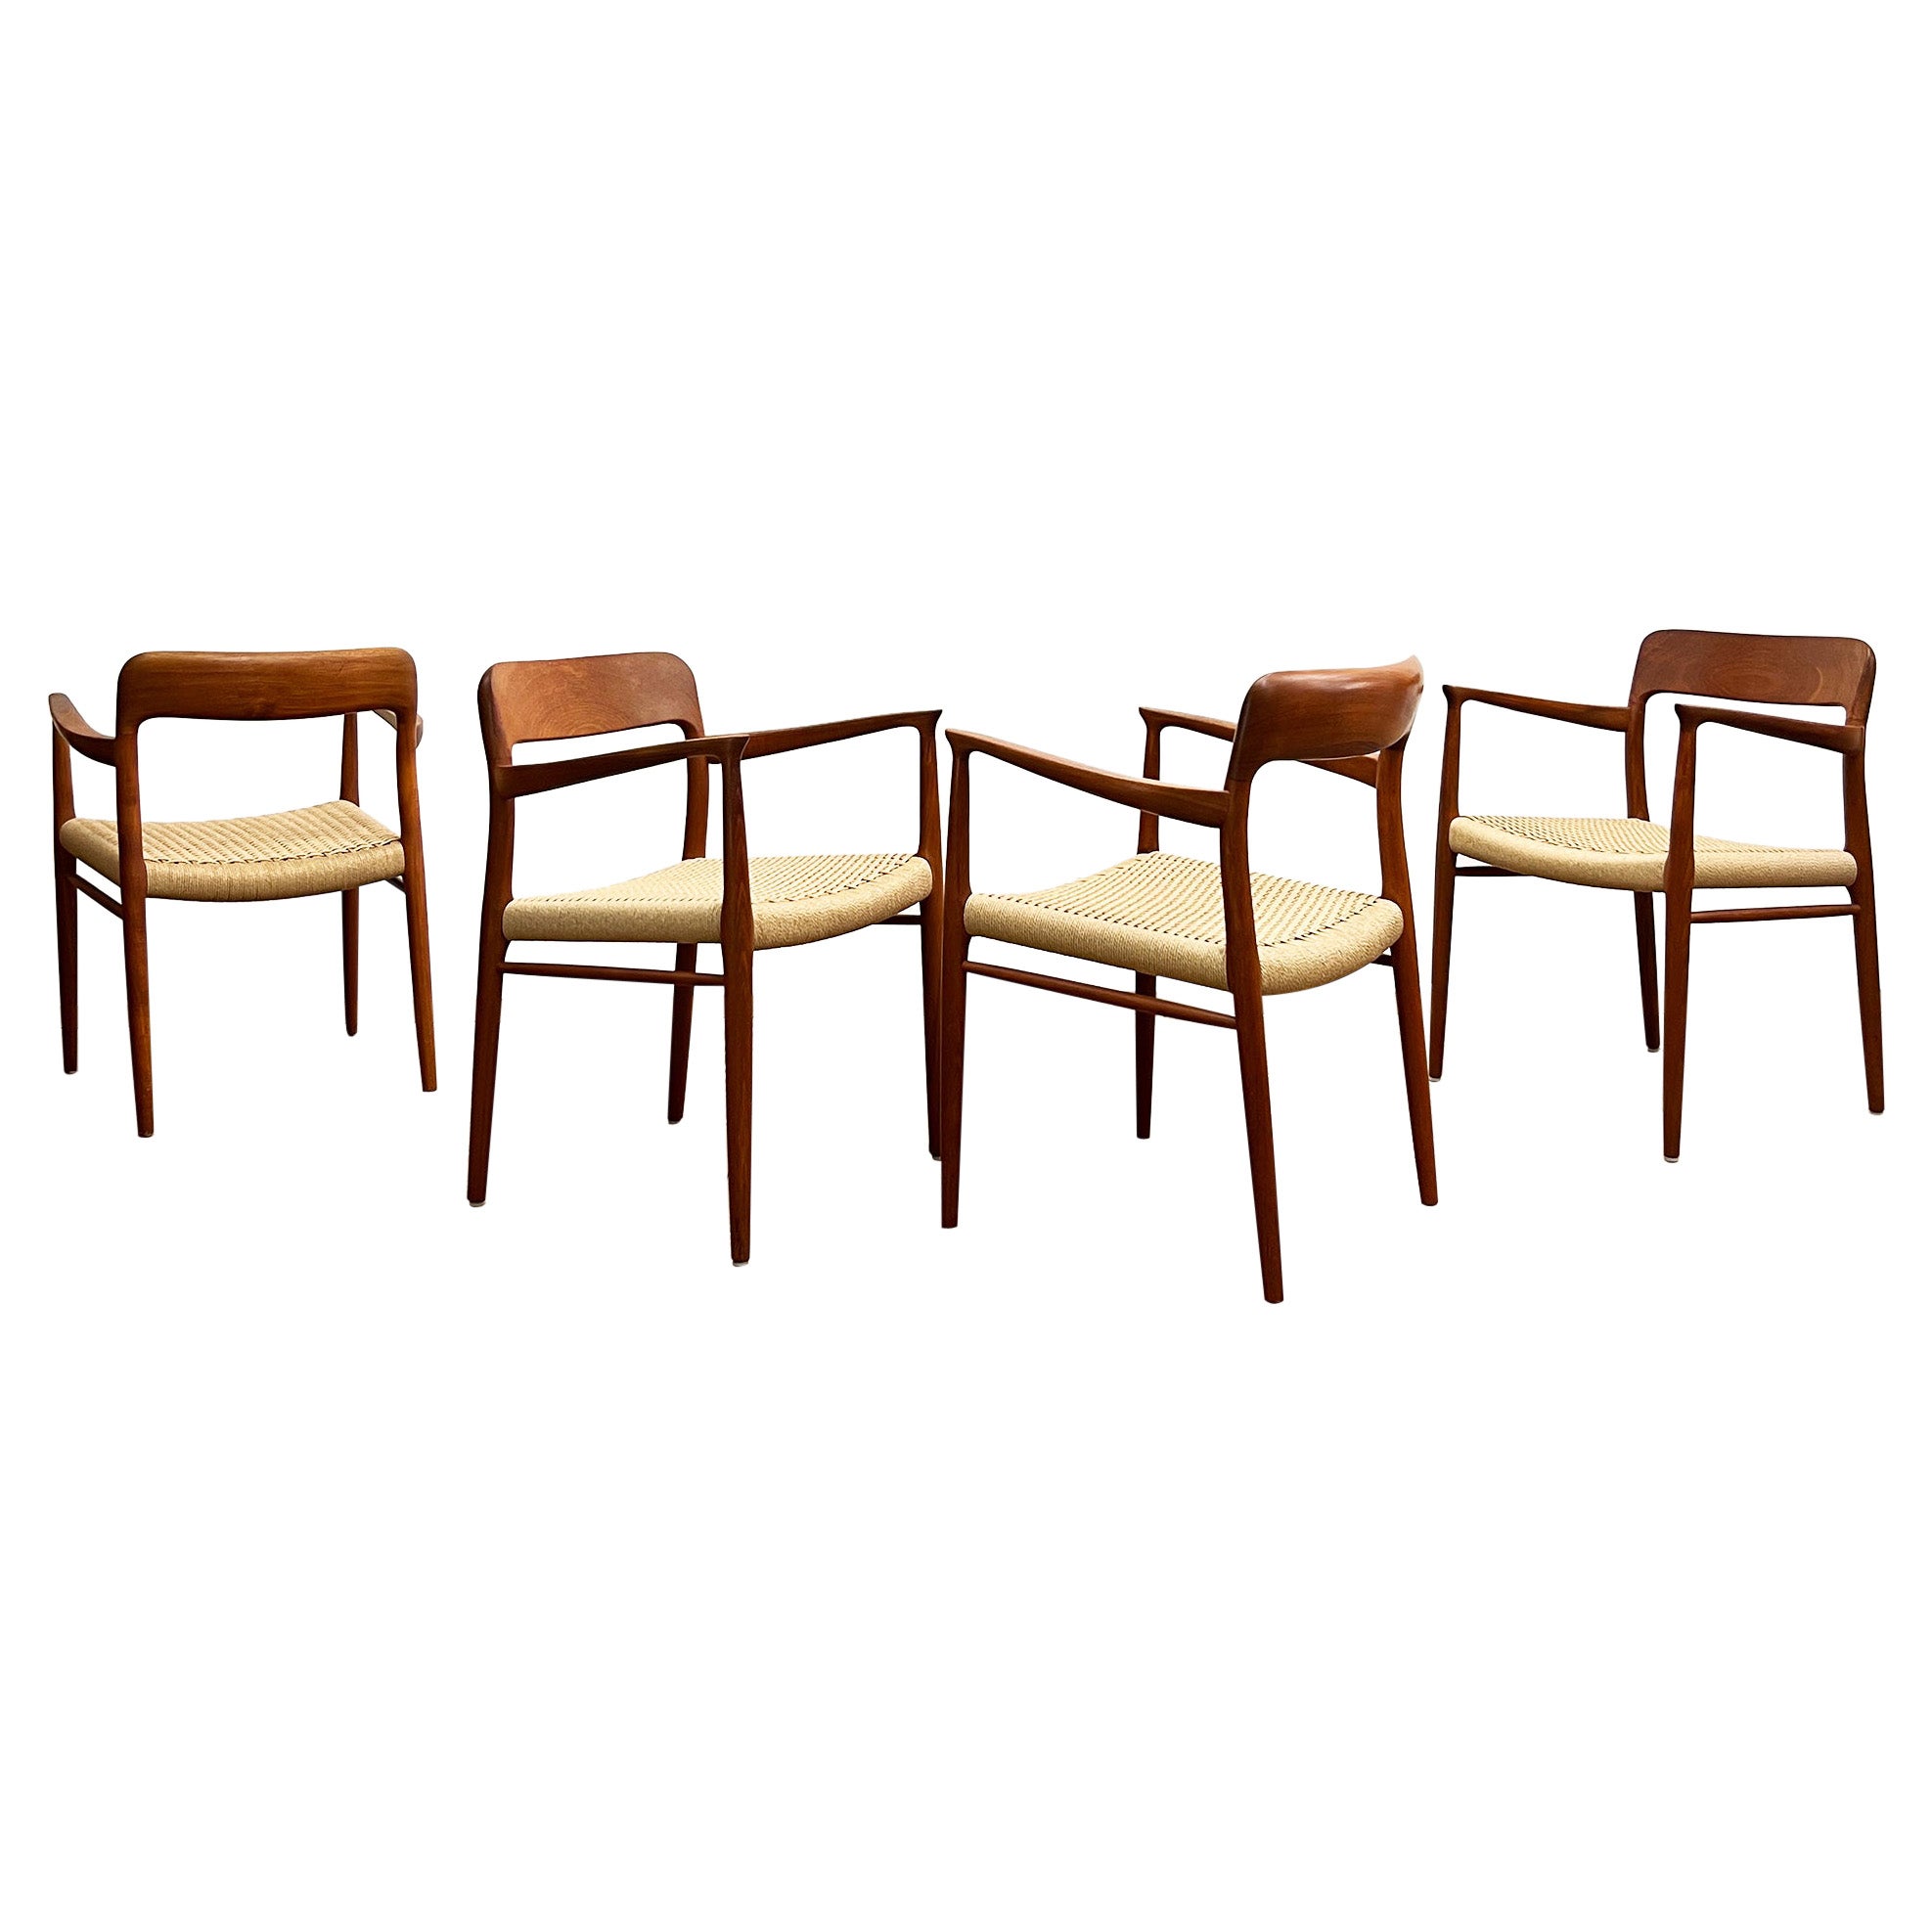 4 Mid-Century Teak Dining Chairs #56 by Niels O. Møller for J. L. Moller